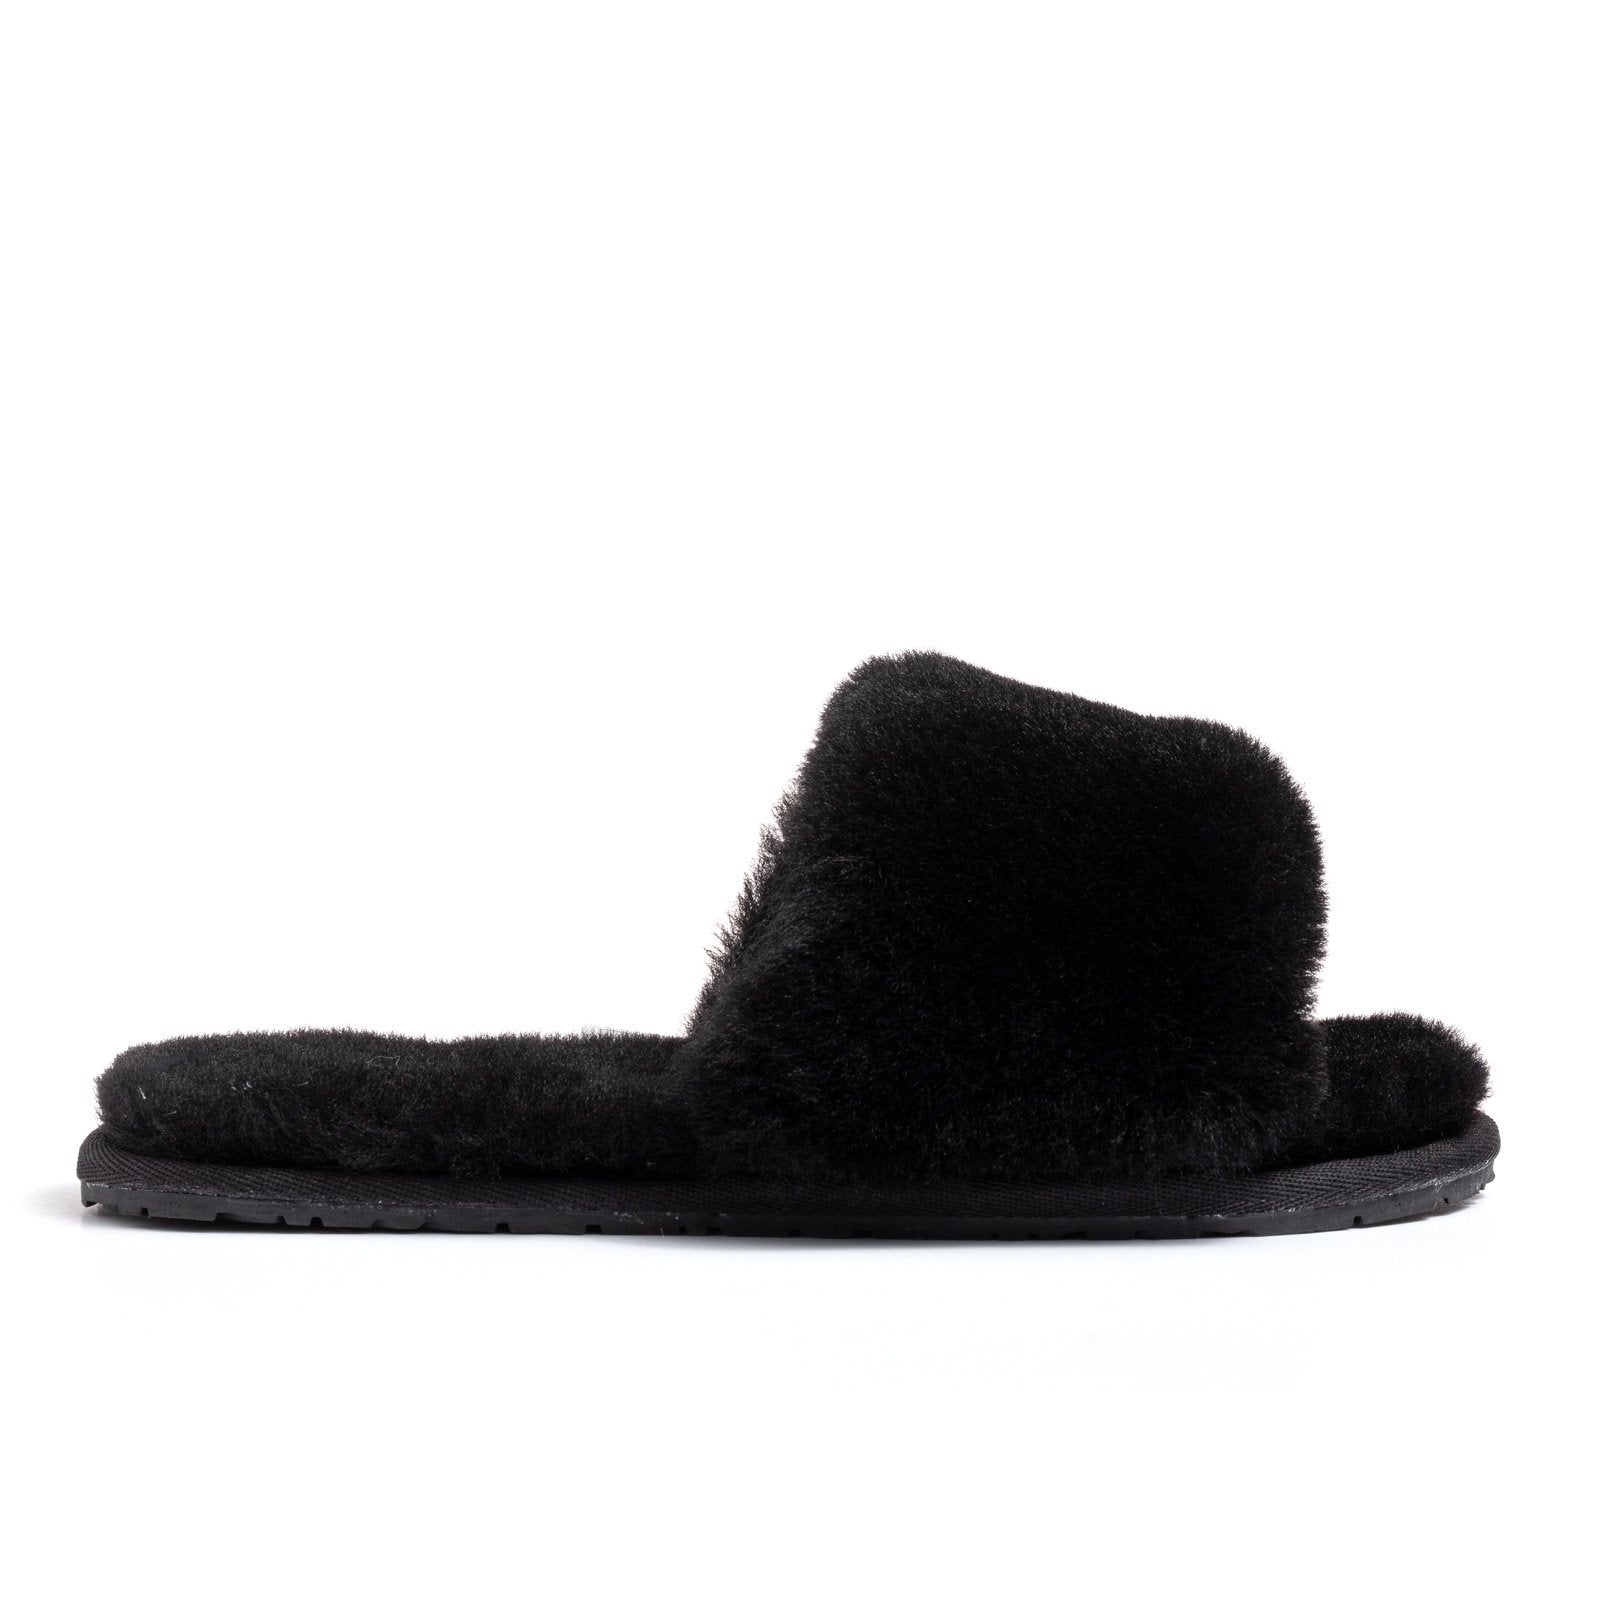 black slippers with fur